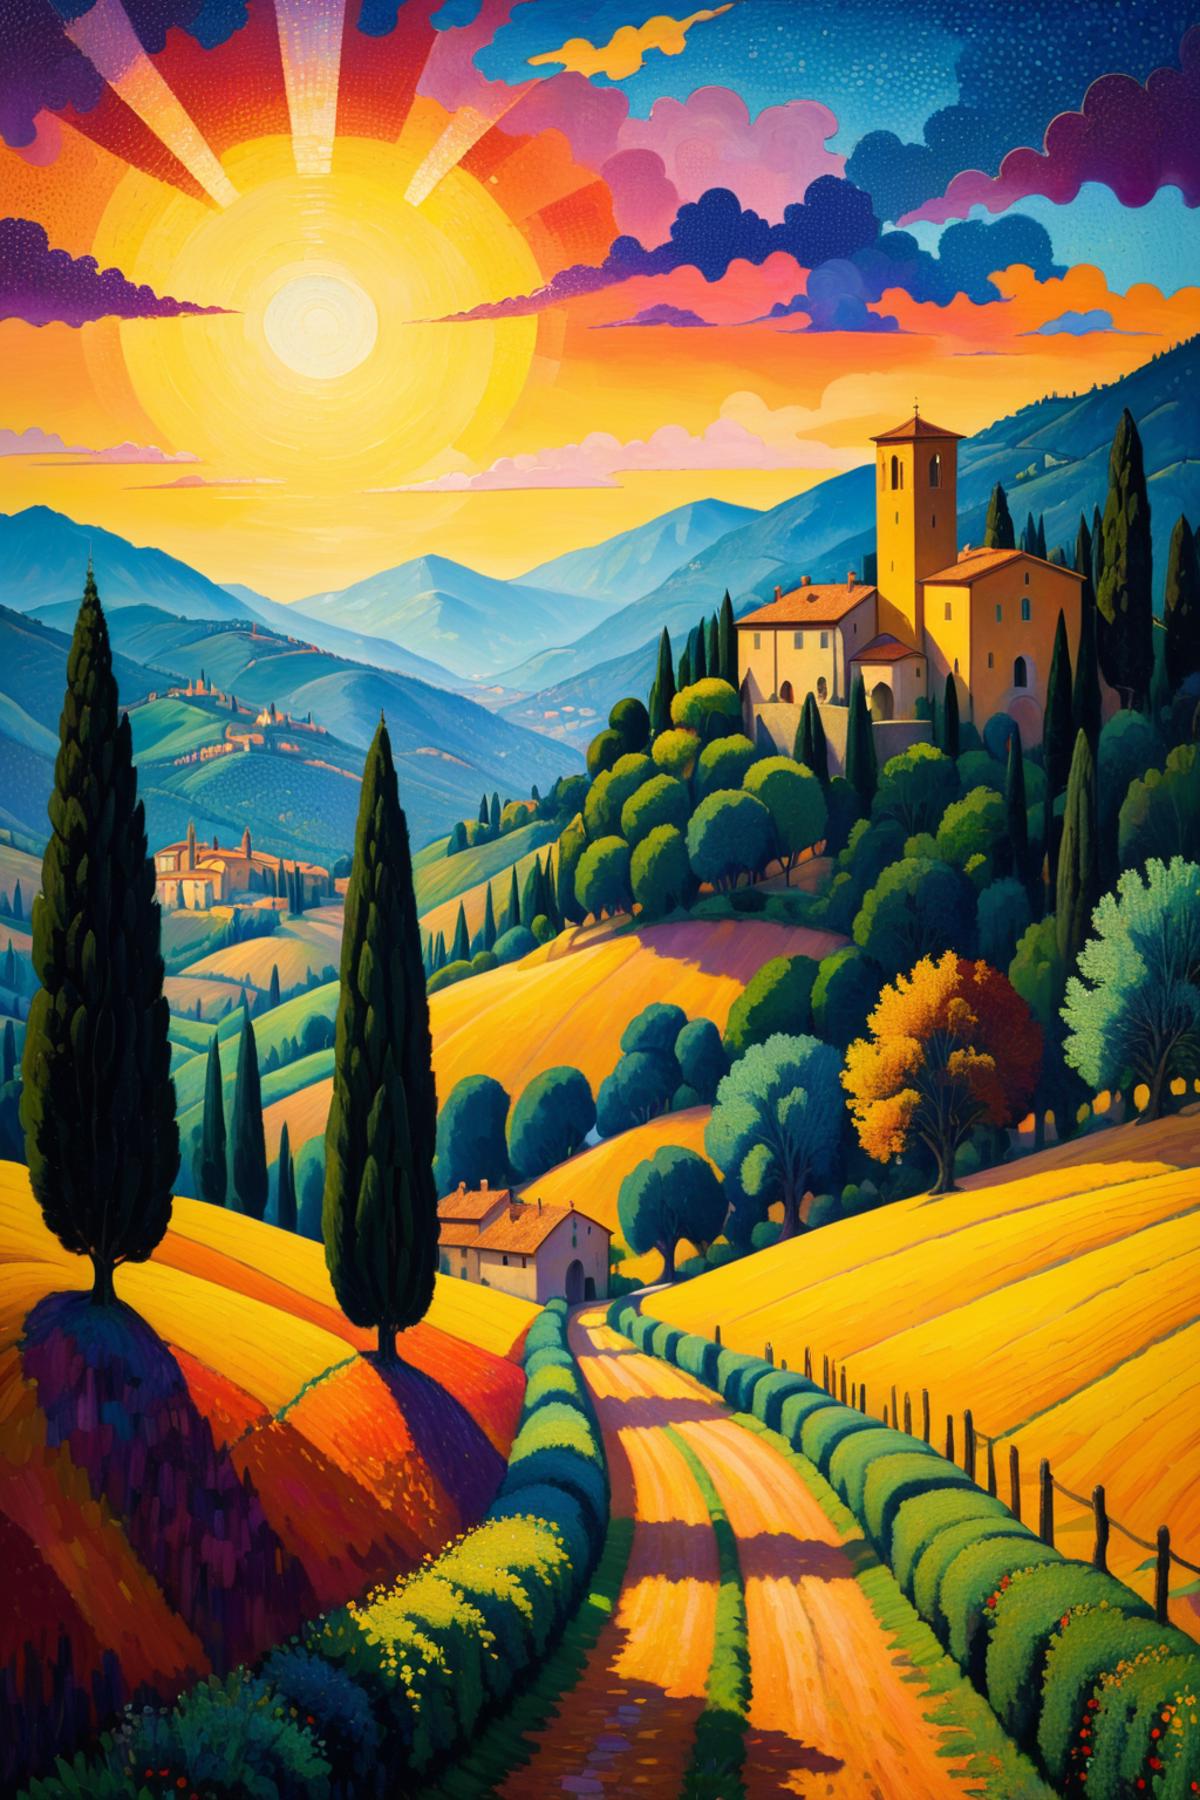 A painting of a sunset in a valley with trees and a large building.